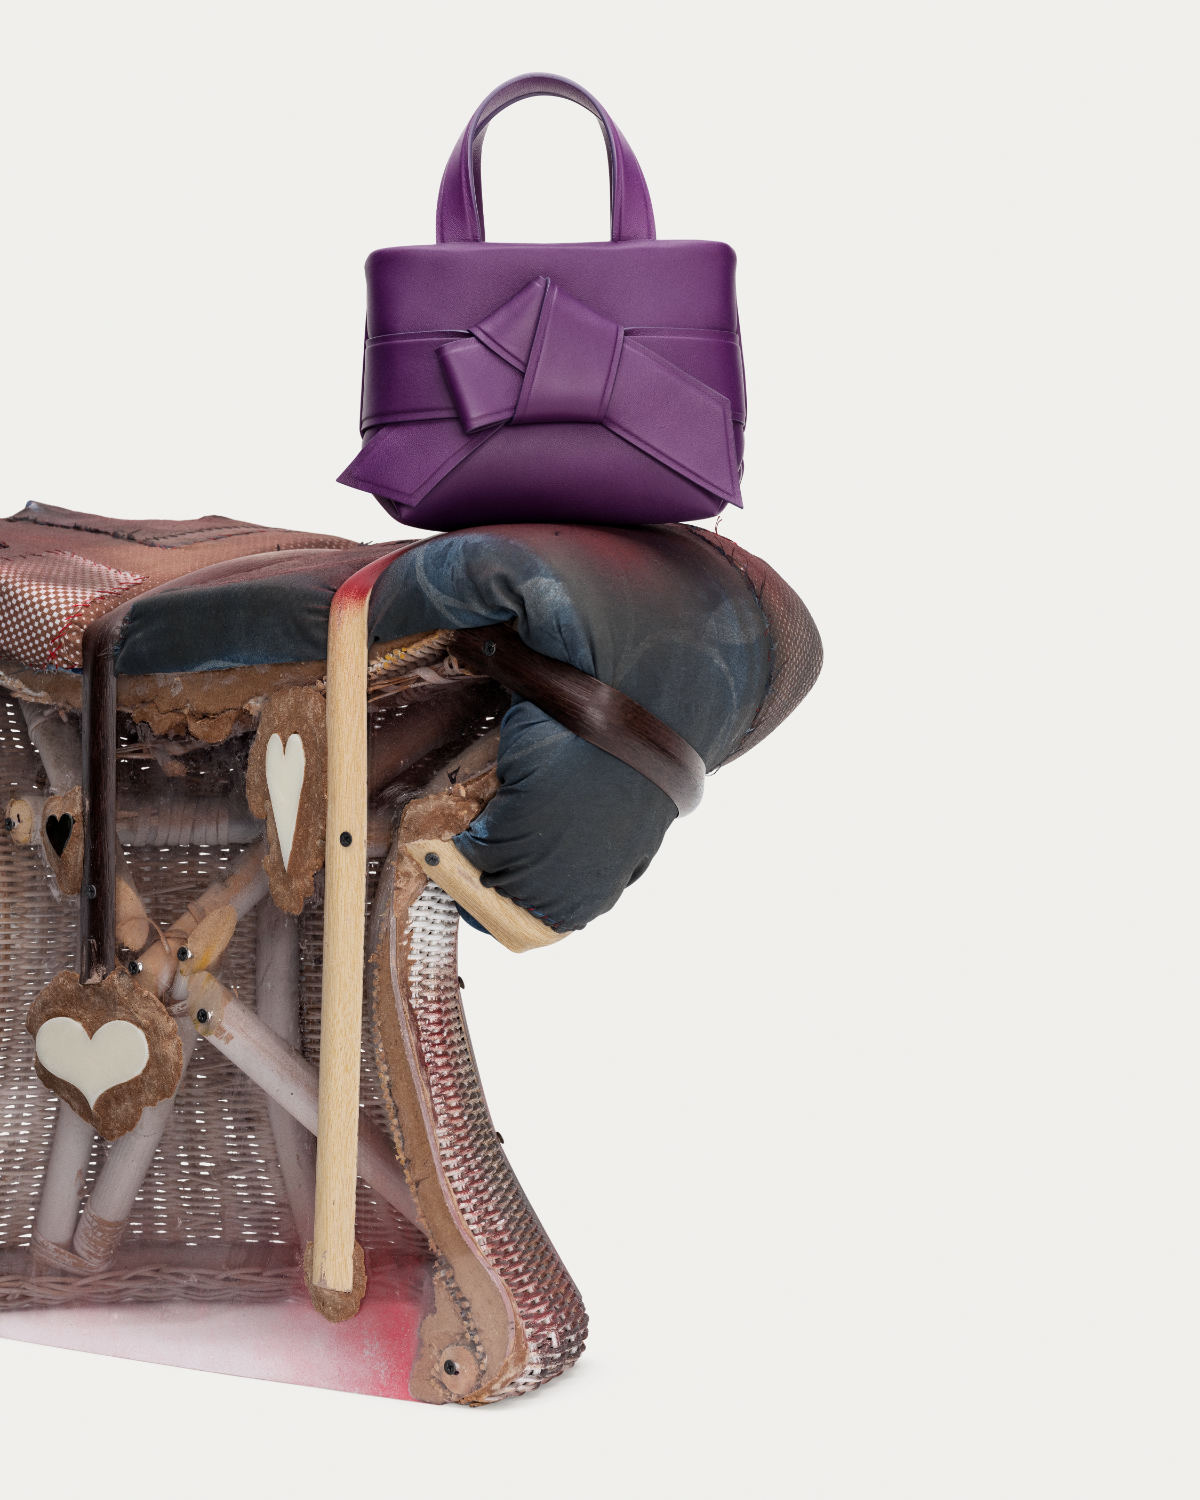 Acne Studios Introduces New Iterations Of The Musubi Bag For Fall/Winter 2022